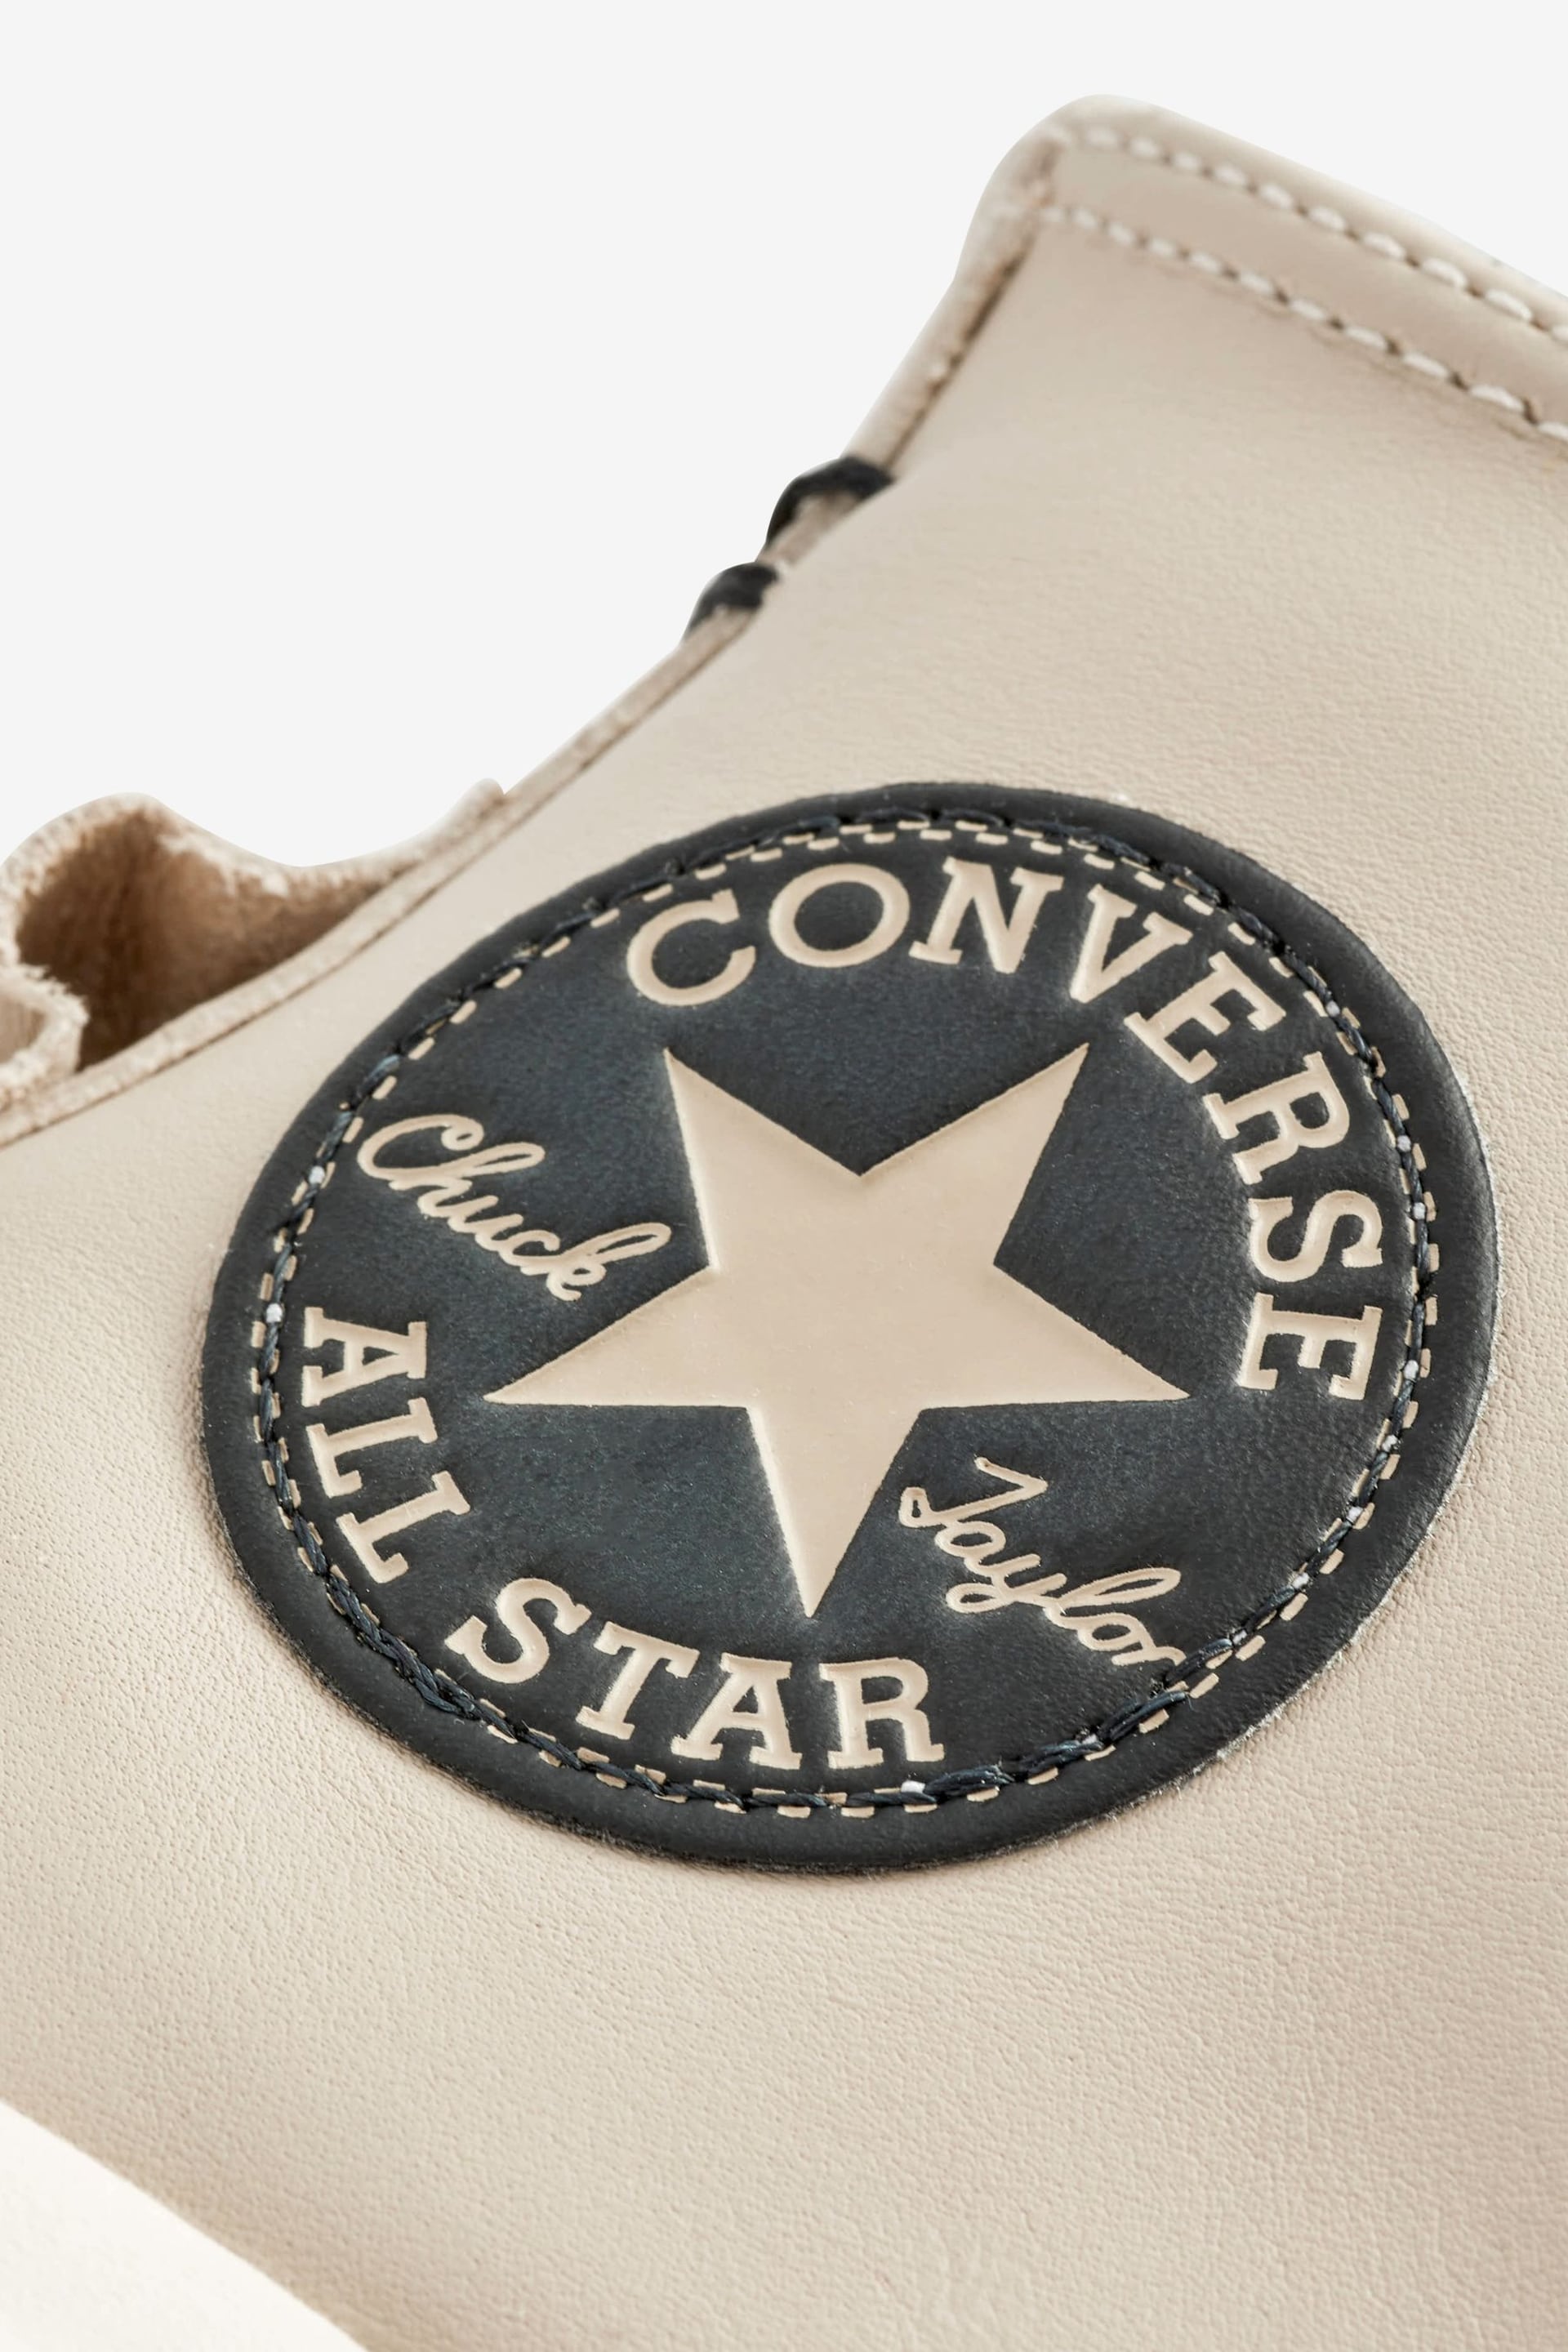 Converse Neutral Chuck Taylor All Star Move Platform Leather Trainers - Image 8 of 12